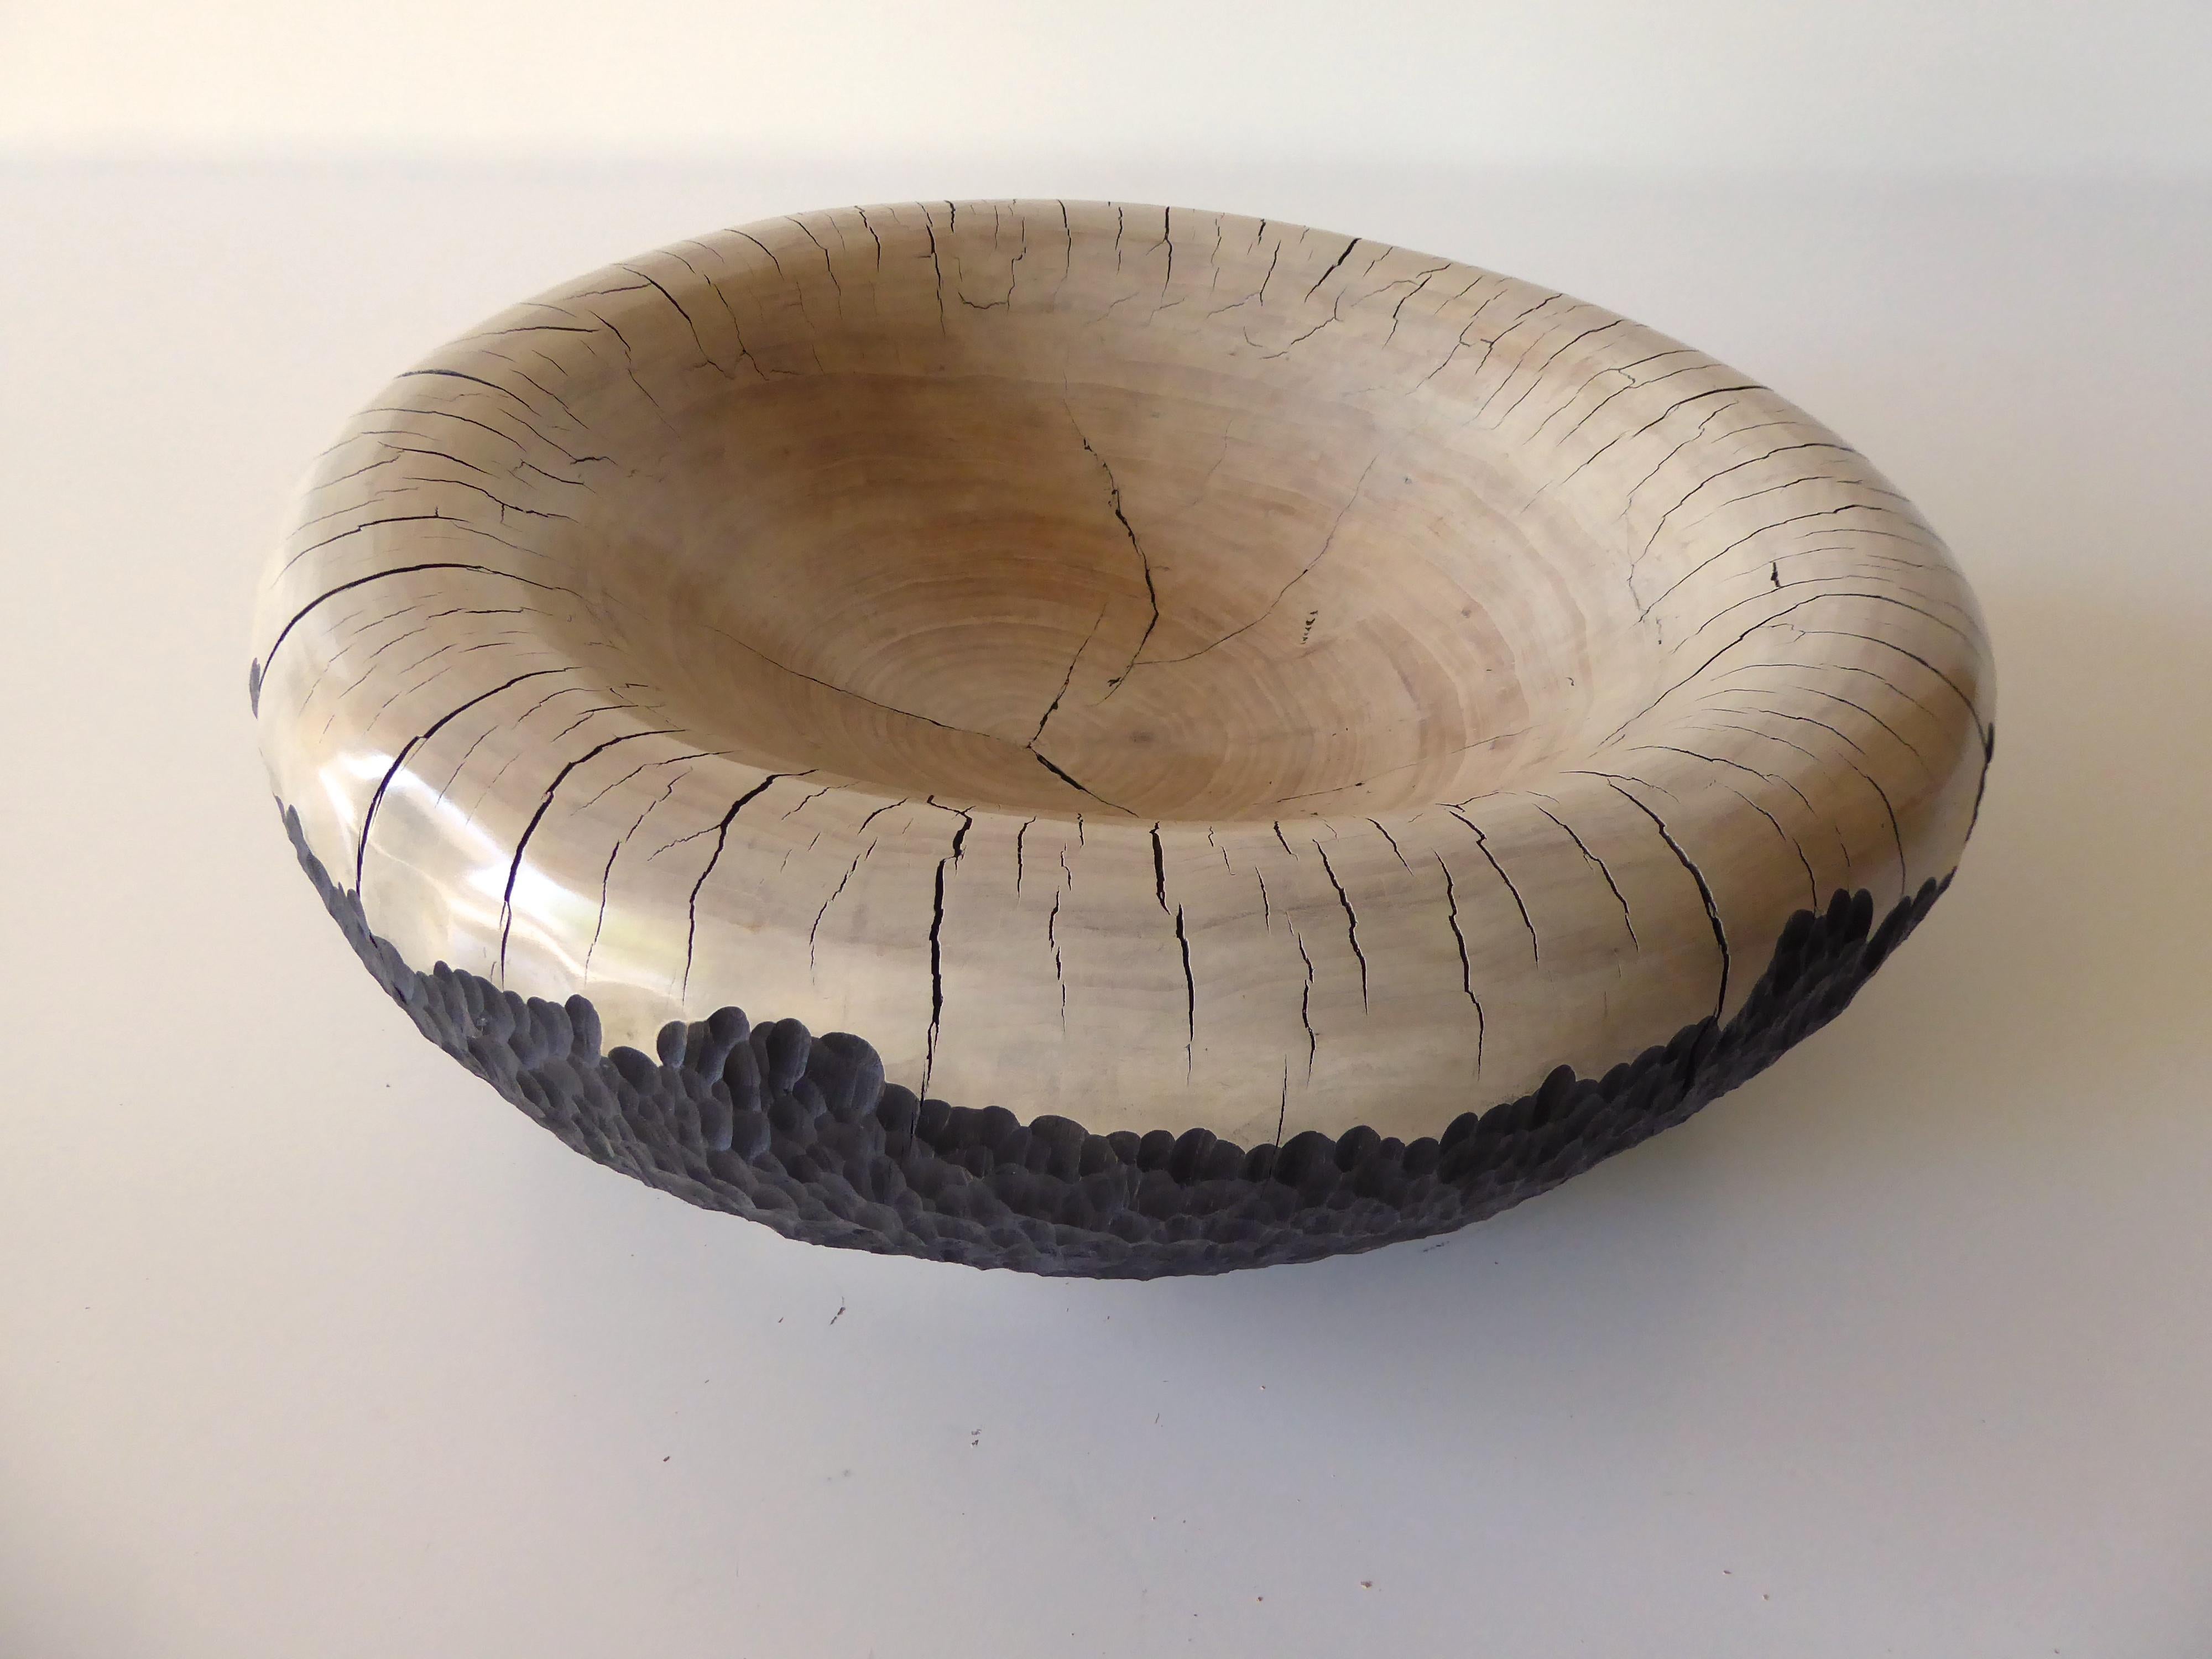 A carved solid cottonwood vessel by contemporary American artist Daniel Pollock. The artist has carved the vessel into a hollowed-out bowl shape and he has accentuated the exterior by naturalistically chip carving the sides. The interior of the